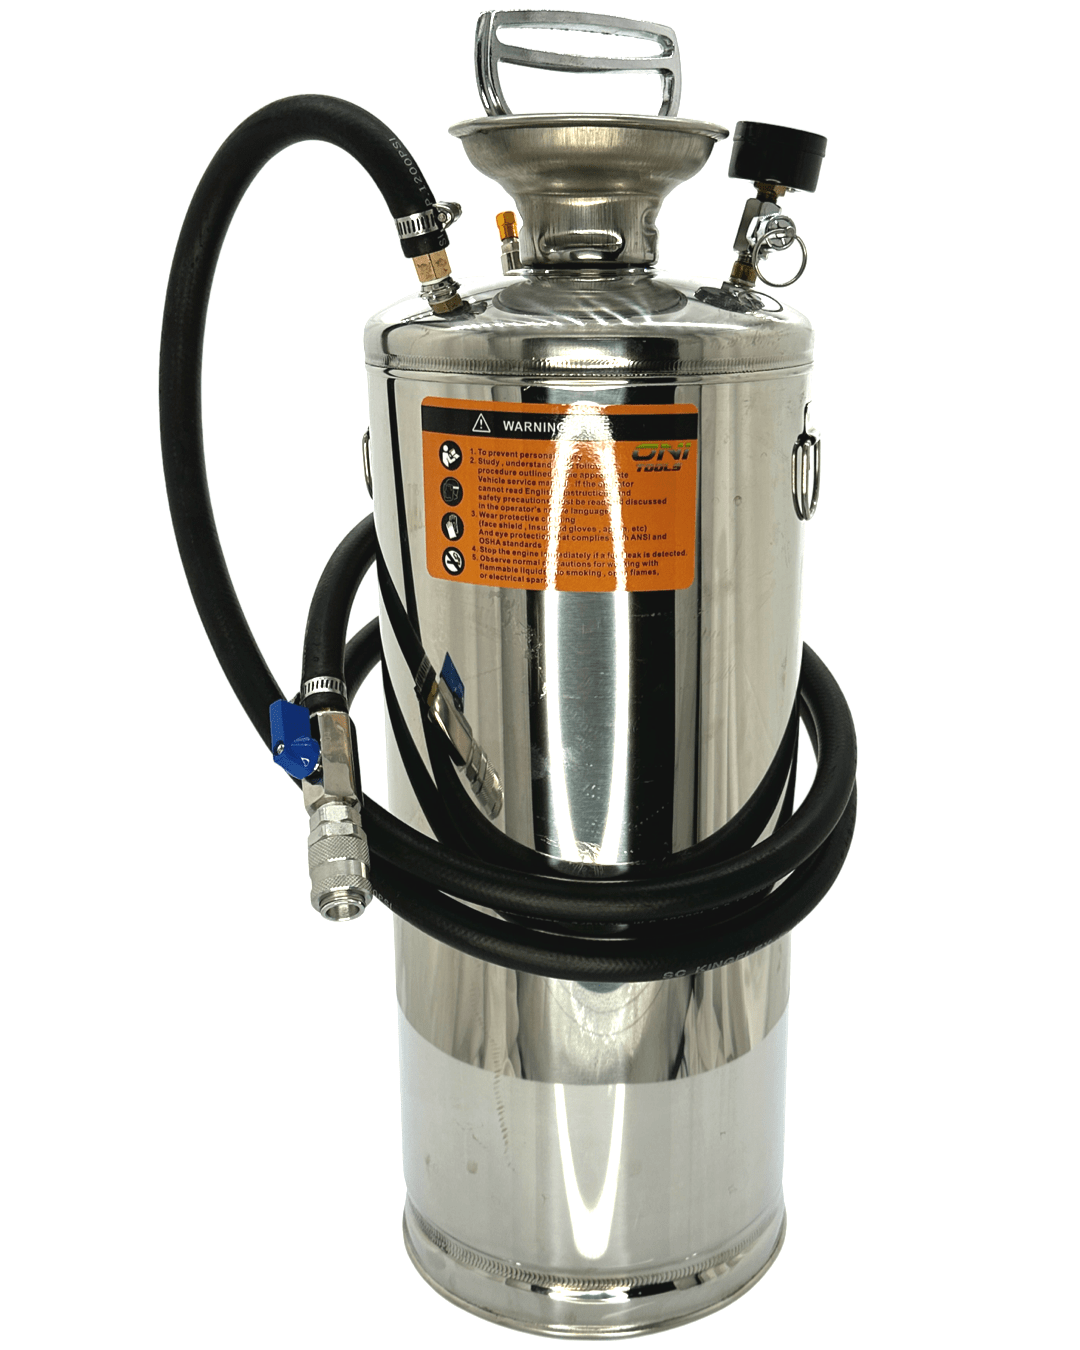 Grease Pump System - 5 Gallon